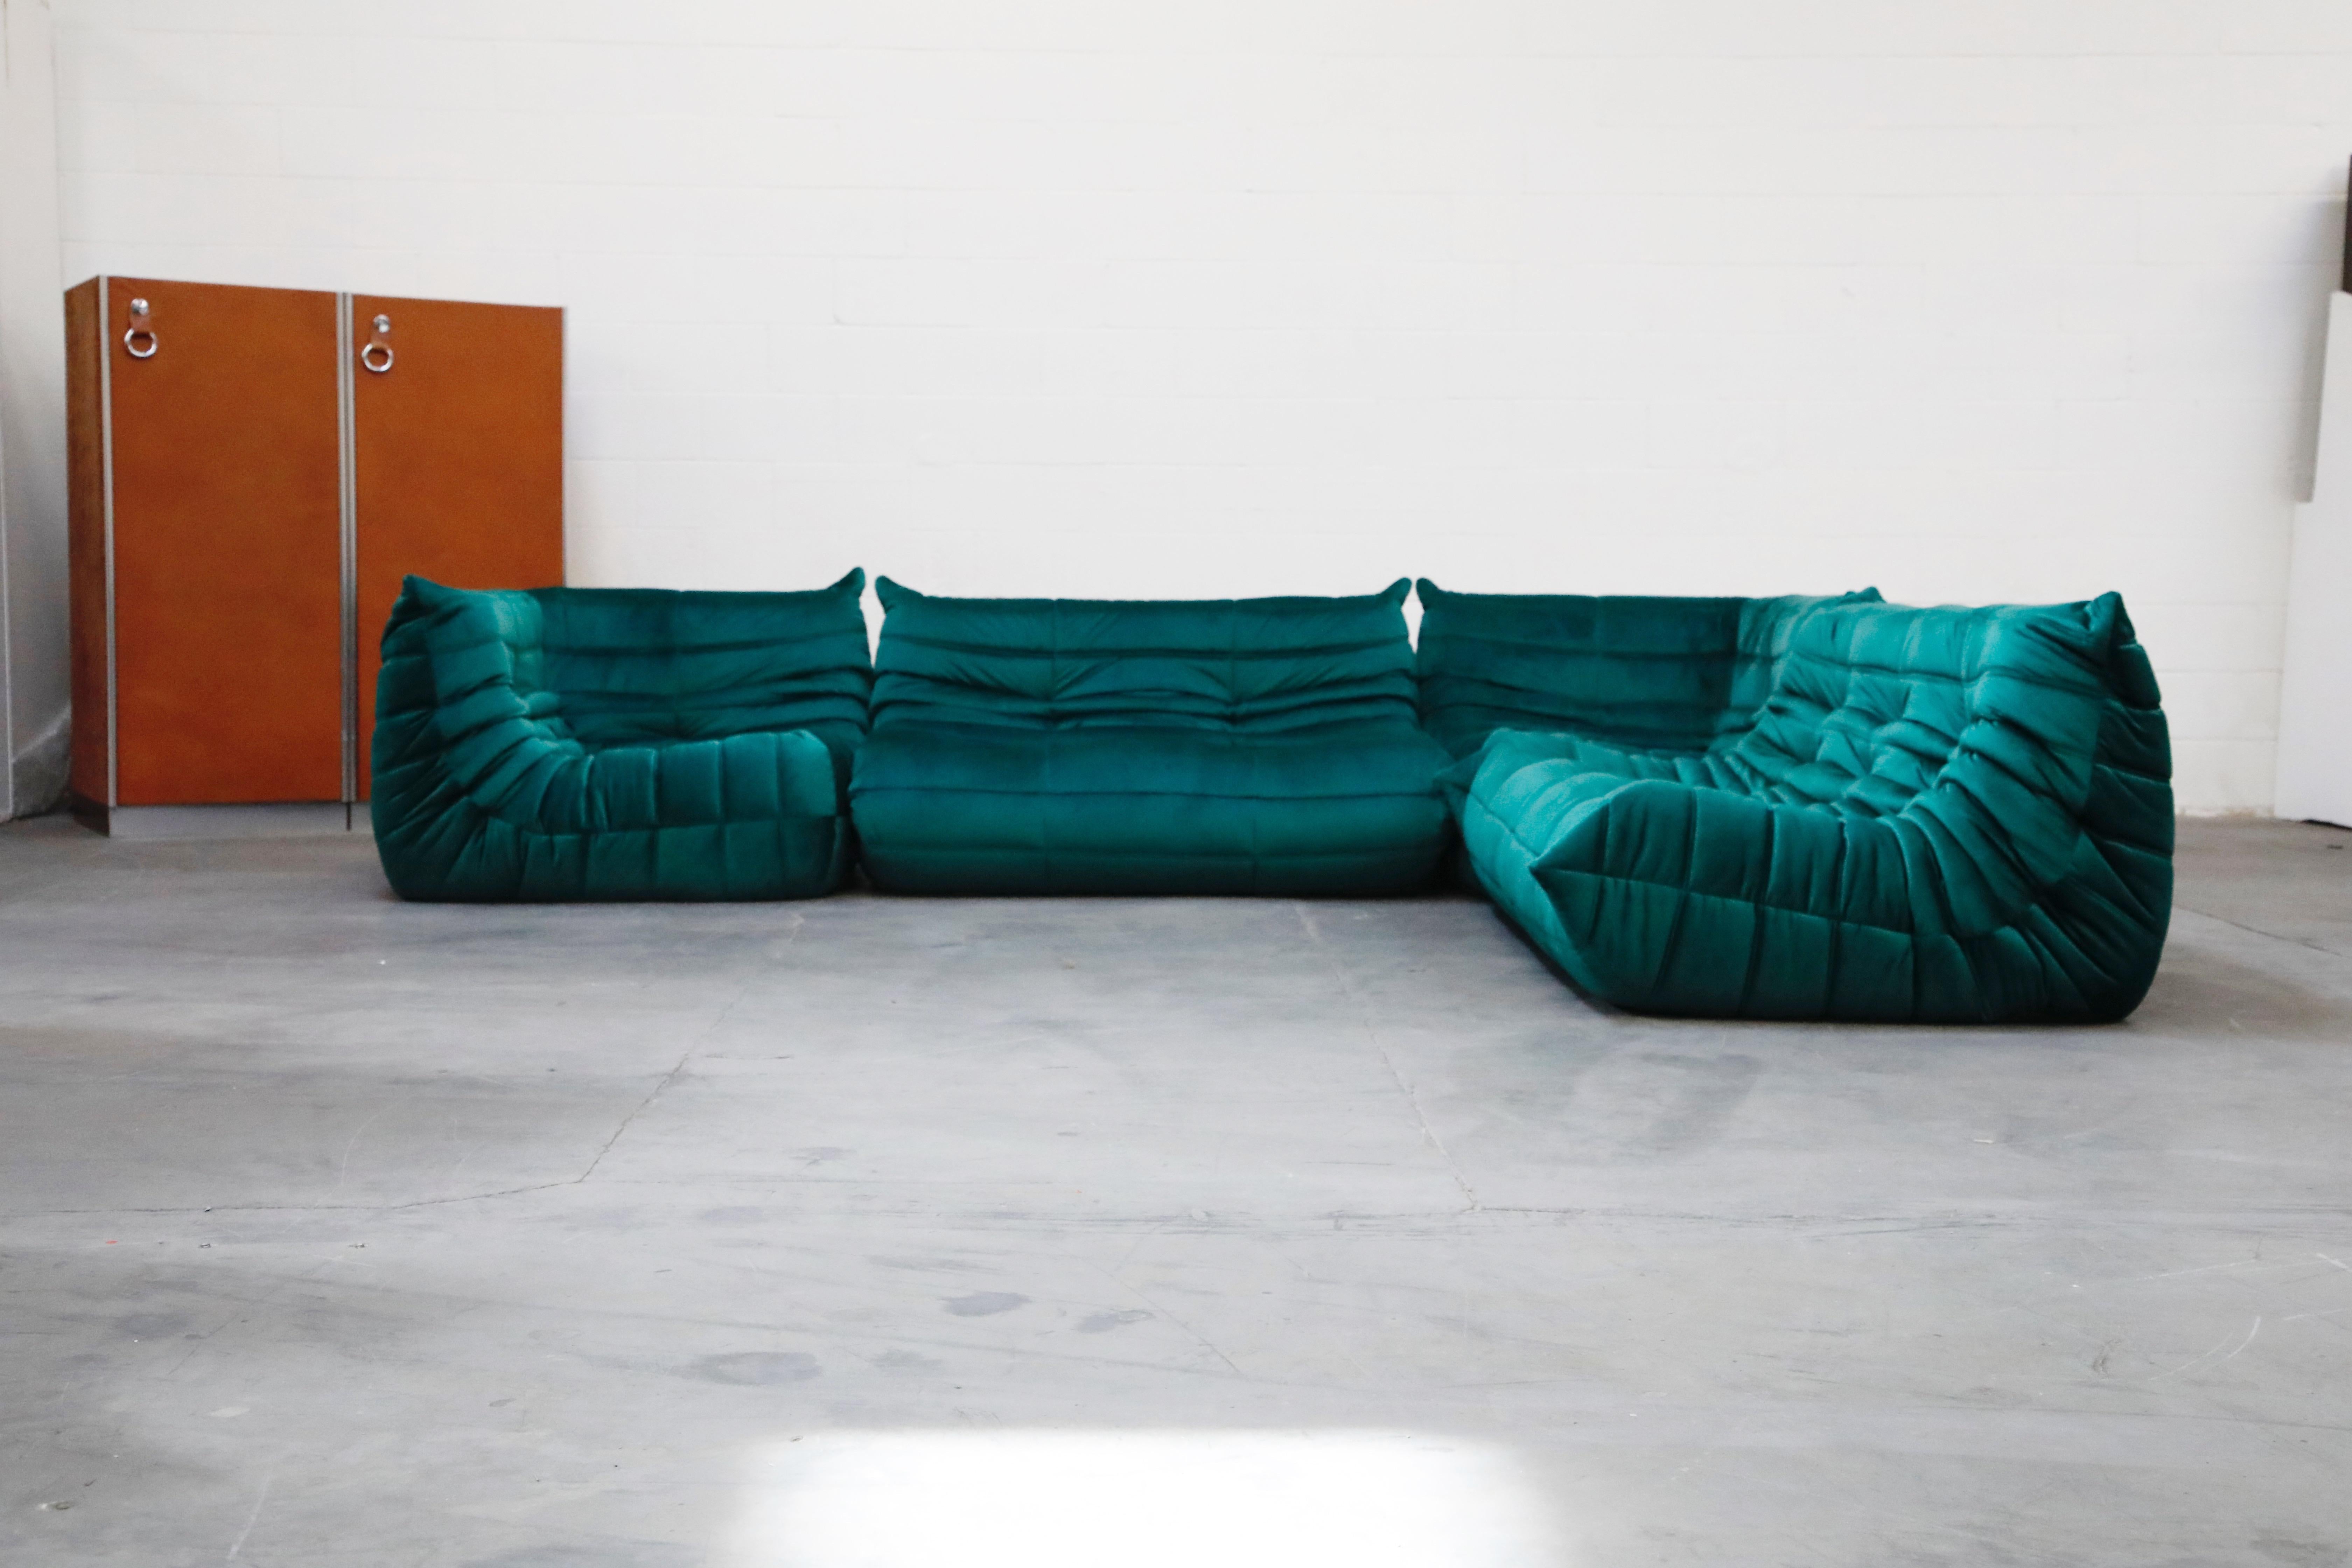 This incredible four (4) piece Togo sectional living room set, was designed by Michel Ducaroy in 1973 for Ligne Roset, France. This set was completely restored with new high grade velvet upholstery in a mesmerizing emerald green color, and bottom